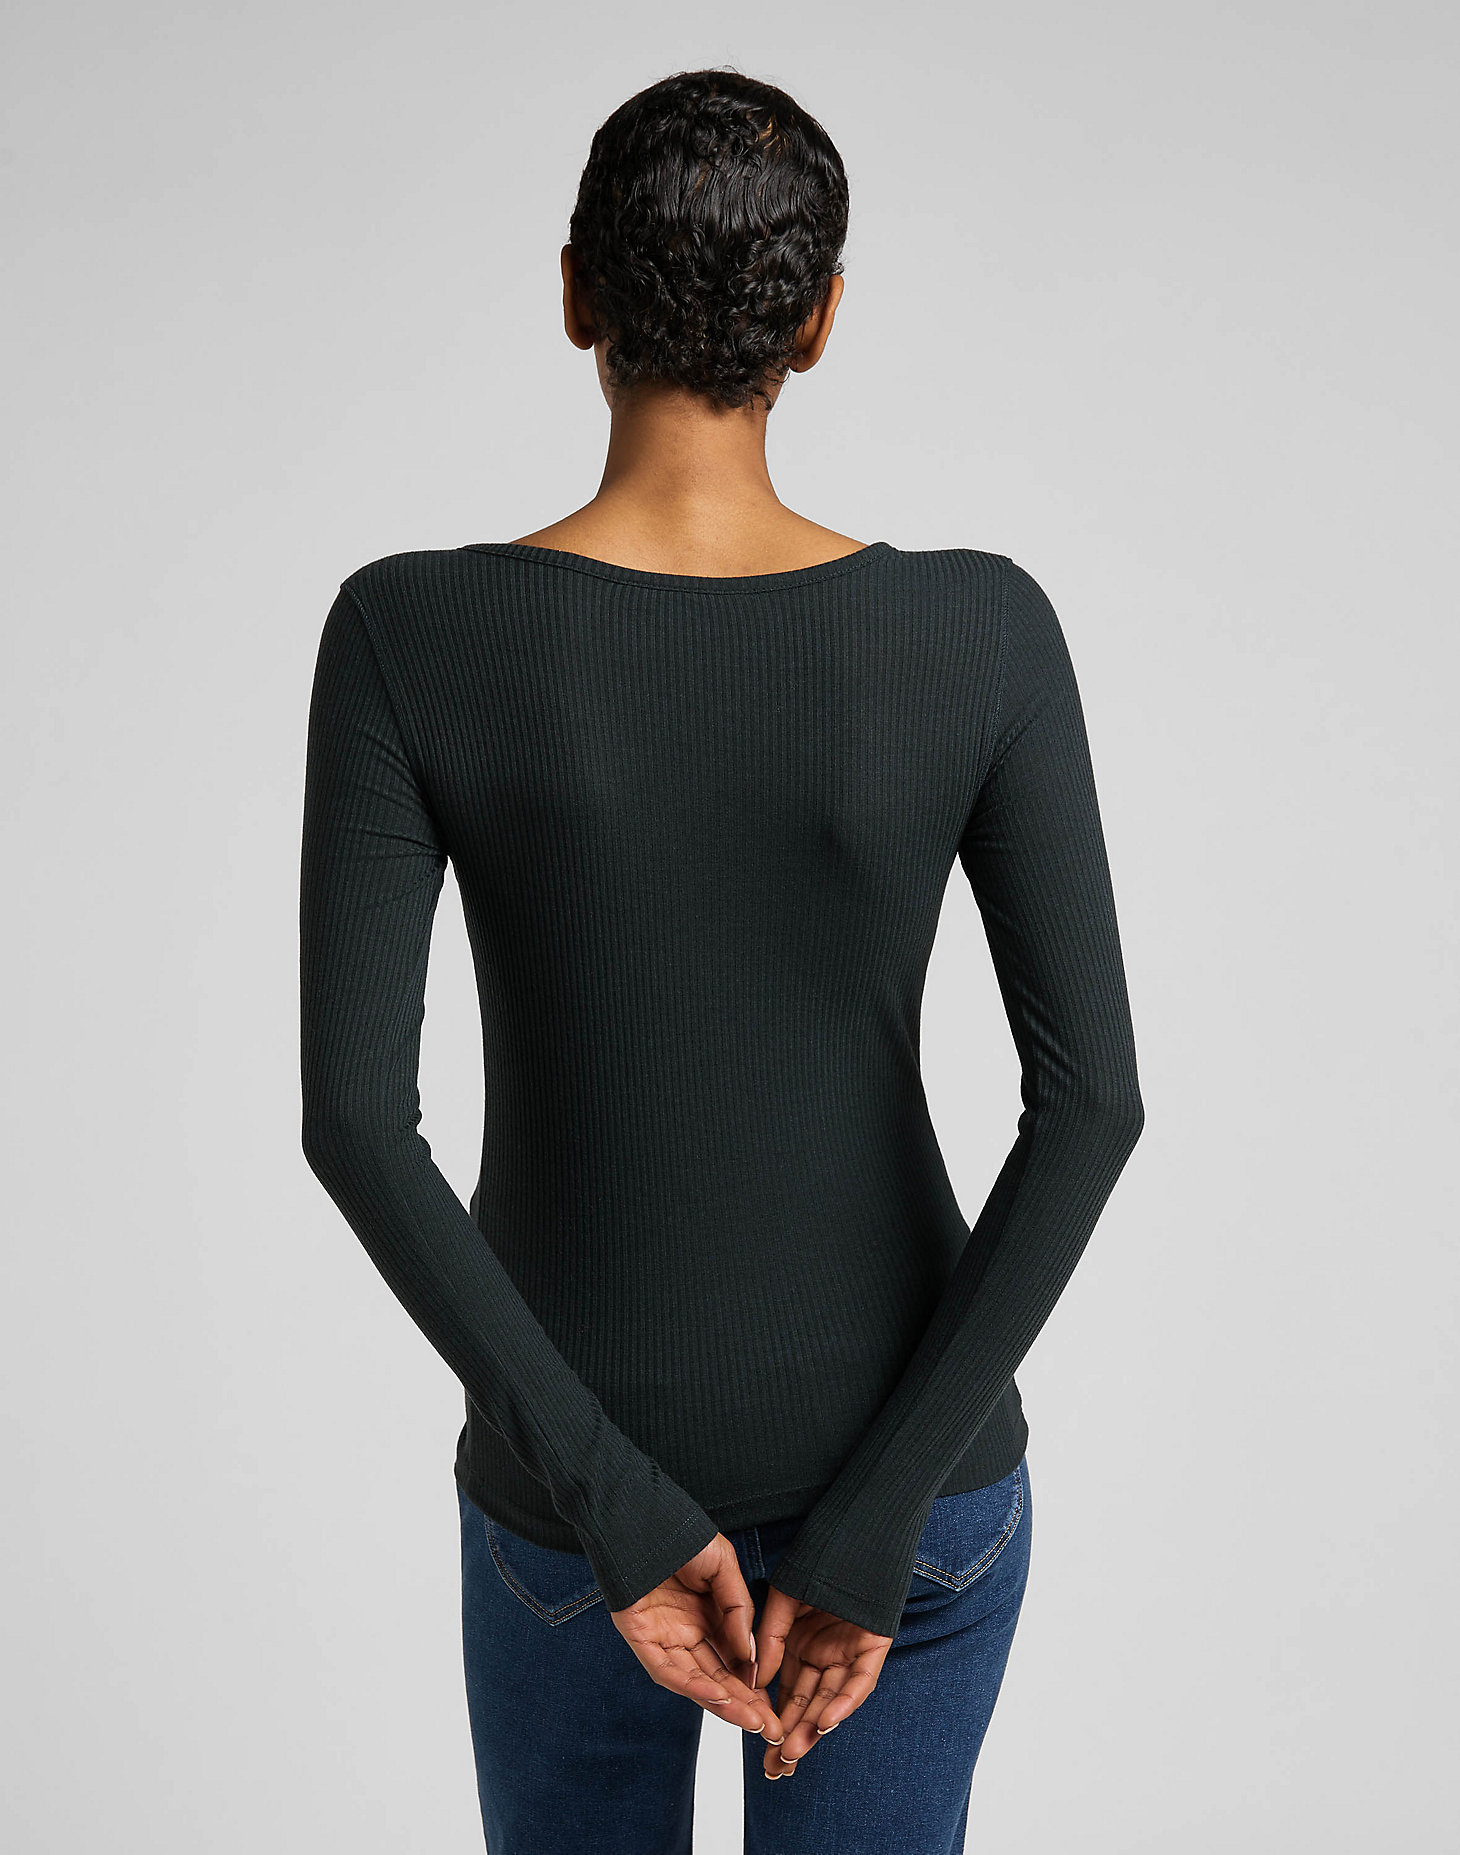 Ribbed Long Sleeve Henley in Charcoal alternative view 1